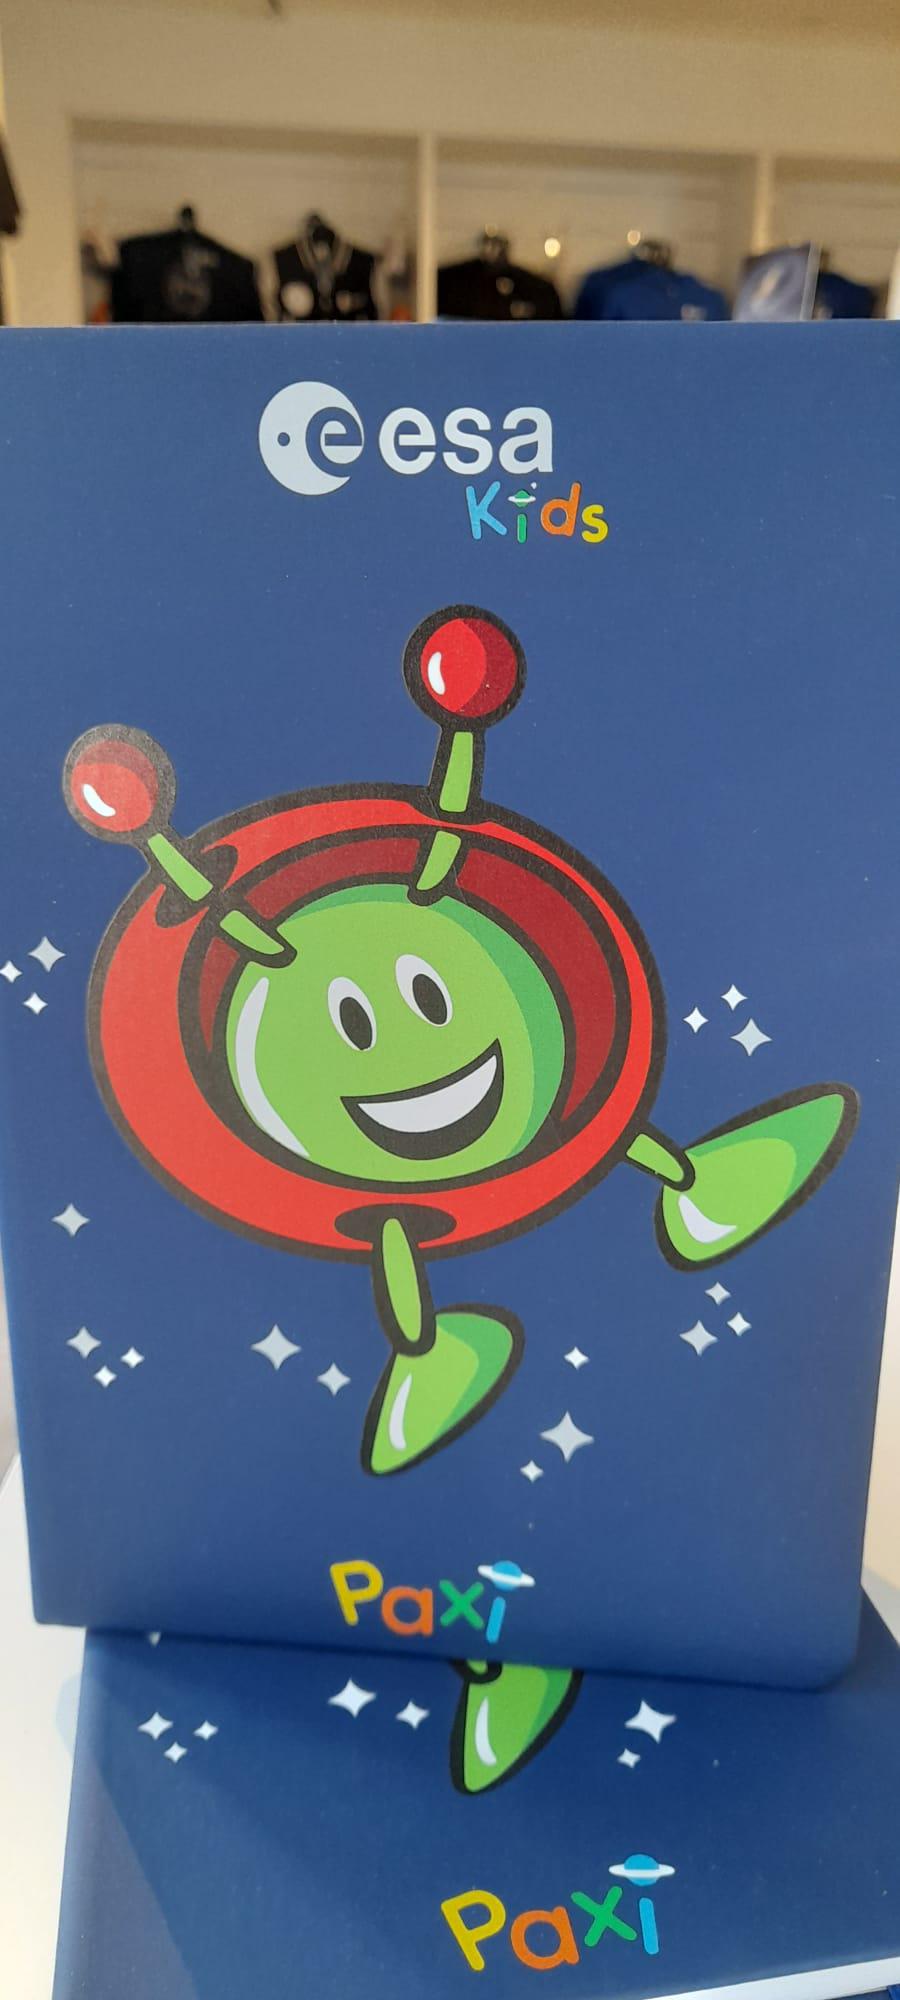 A photo showing an ESA Paxi Notebook. The notebook is blue and has a drawing of a green alien with antennae on the front. Paxi is a mascot for ESA kids.